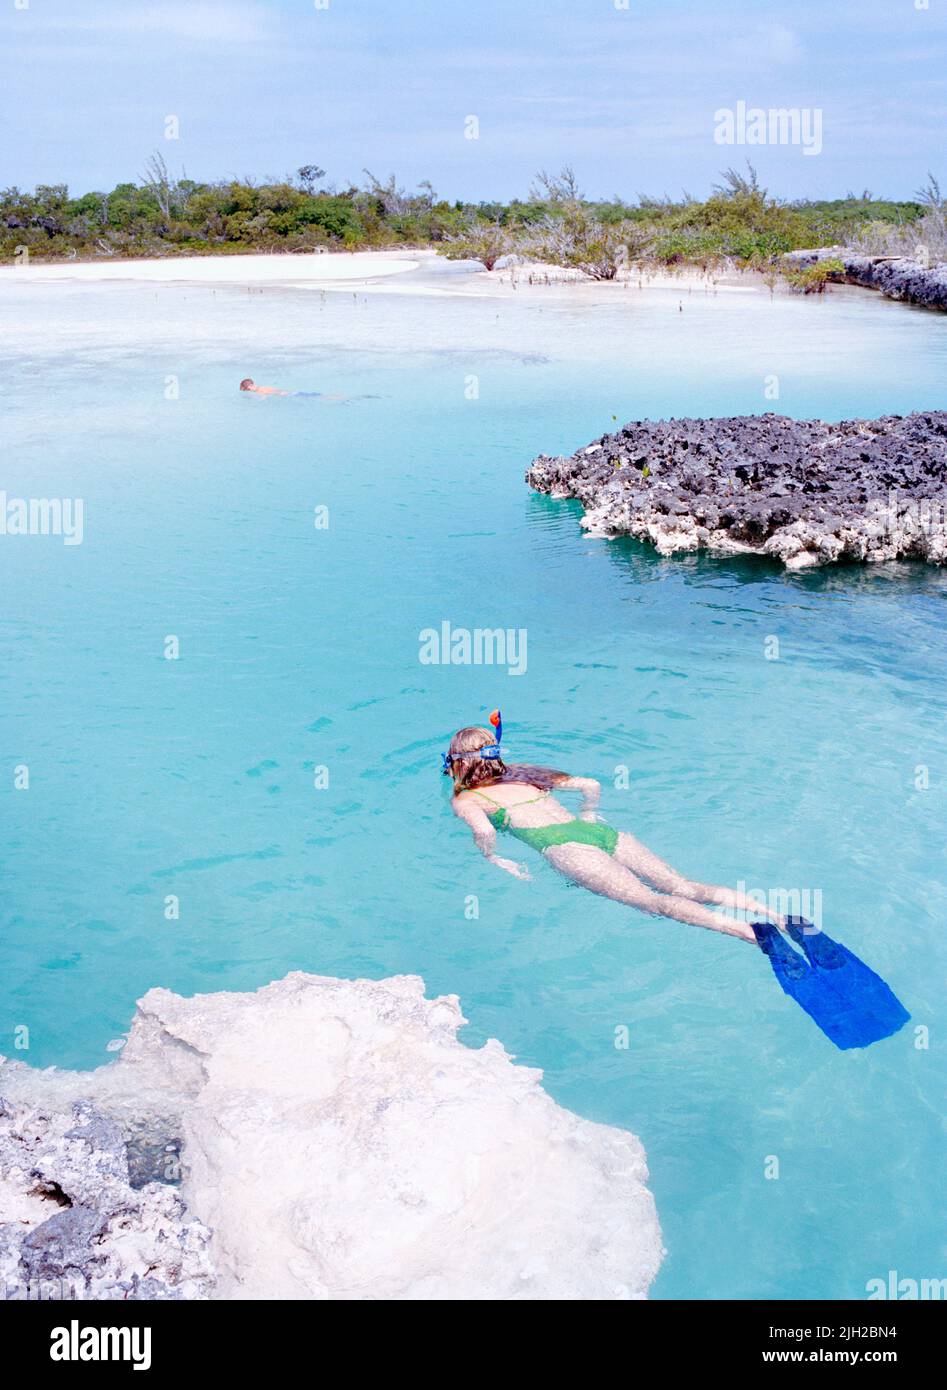 Guests from Tiamo Resort snorkel at the entrance to 'The Crack'. A popular snorkling destination near the resort. South Bight Waterway, Bahamas. Stock Photo